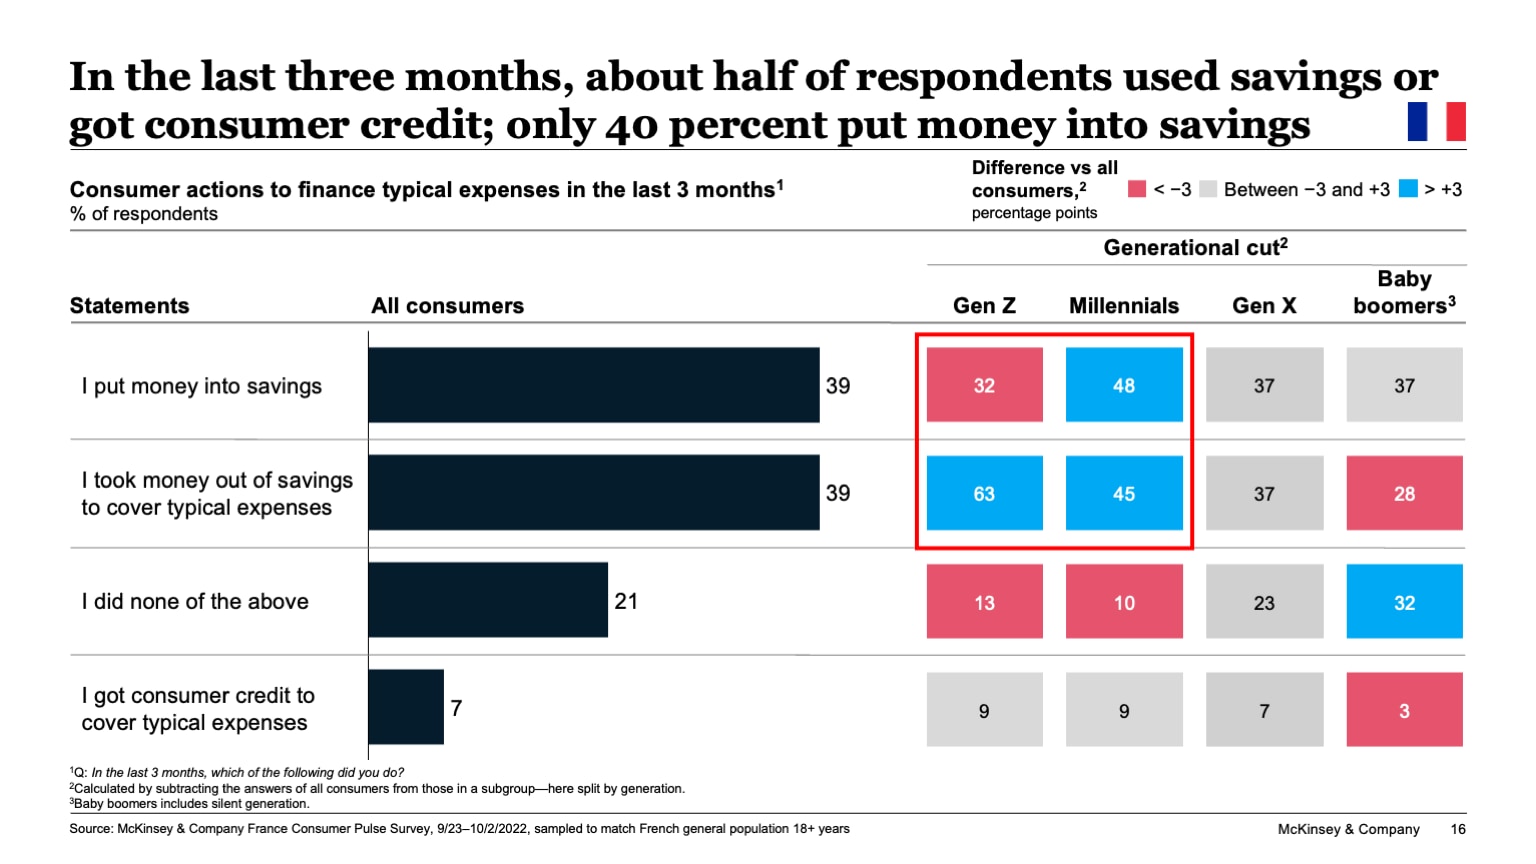 In the last three months, about half of respondents used savings or got consumer credit; only 40 percent put money into savings